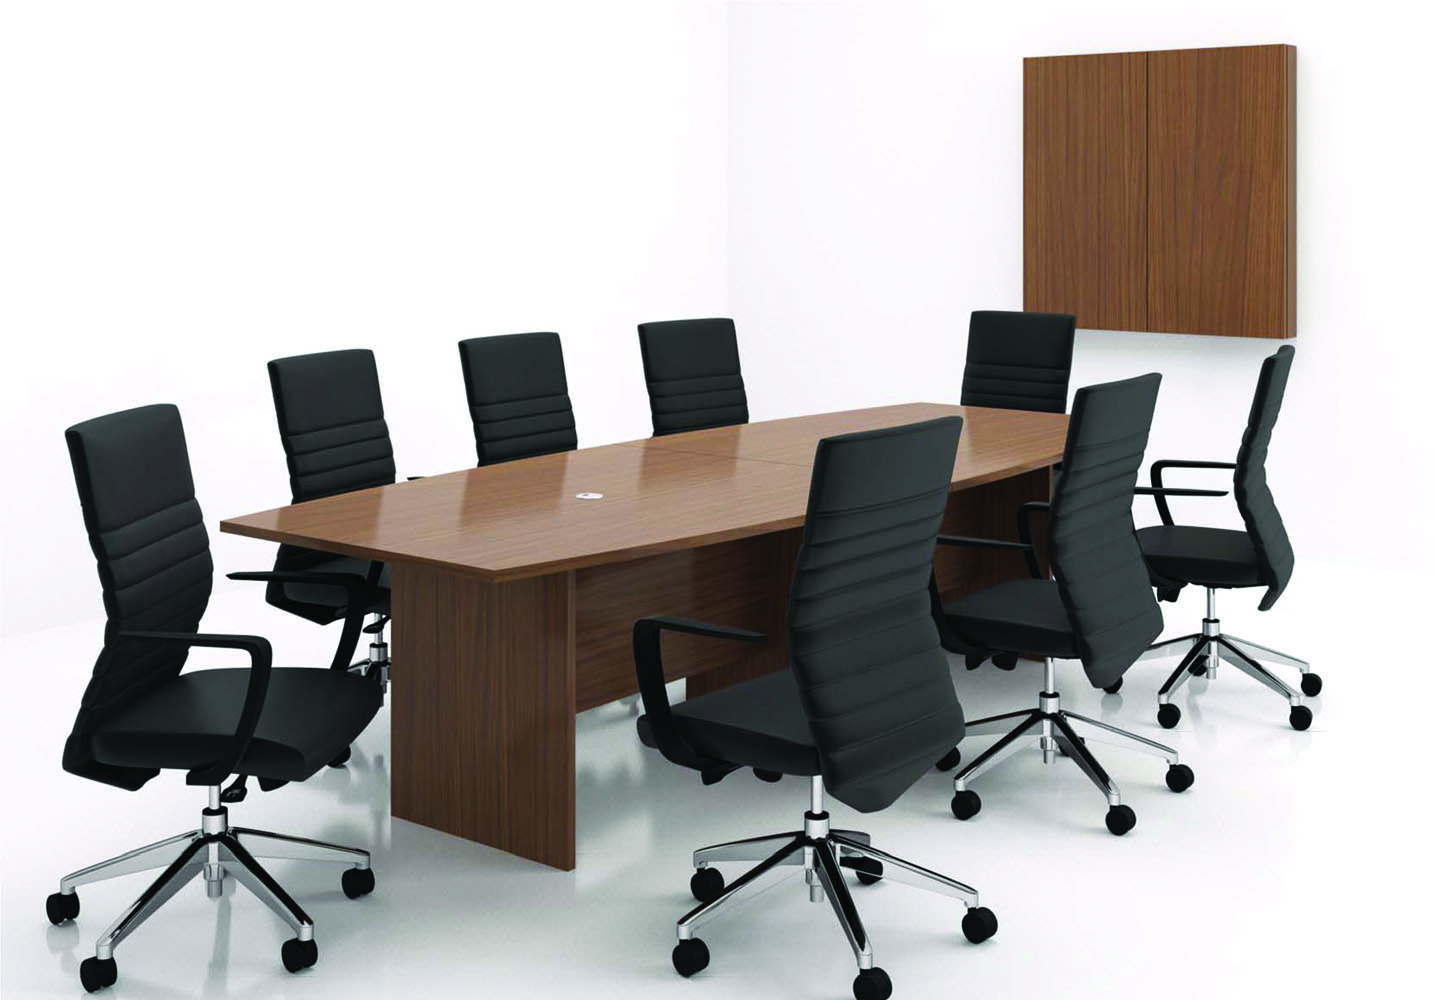 Conference Room Setup - Collaboration Spaces Office Furniture Sets